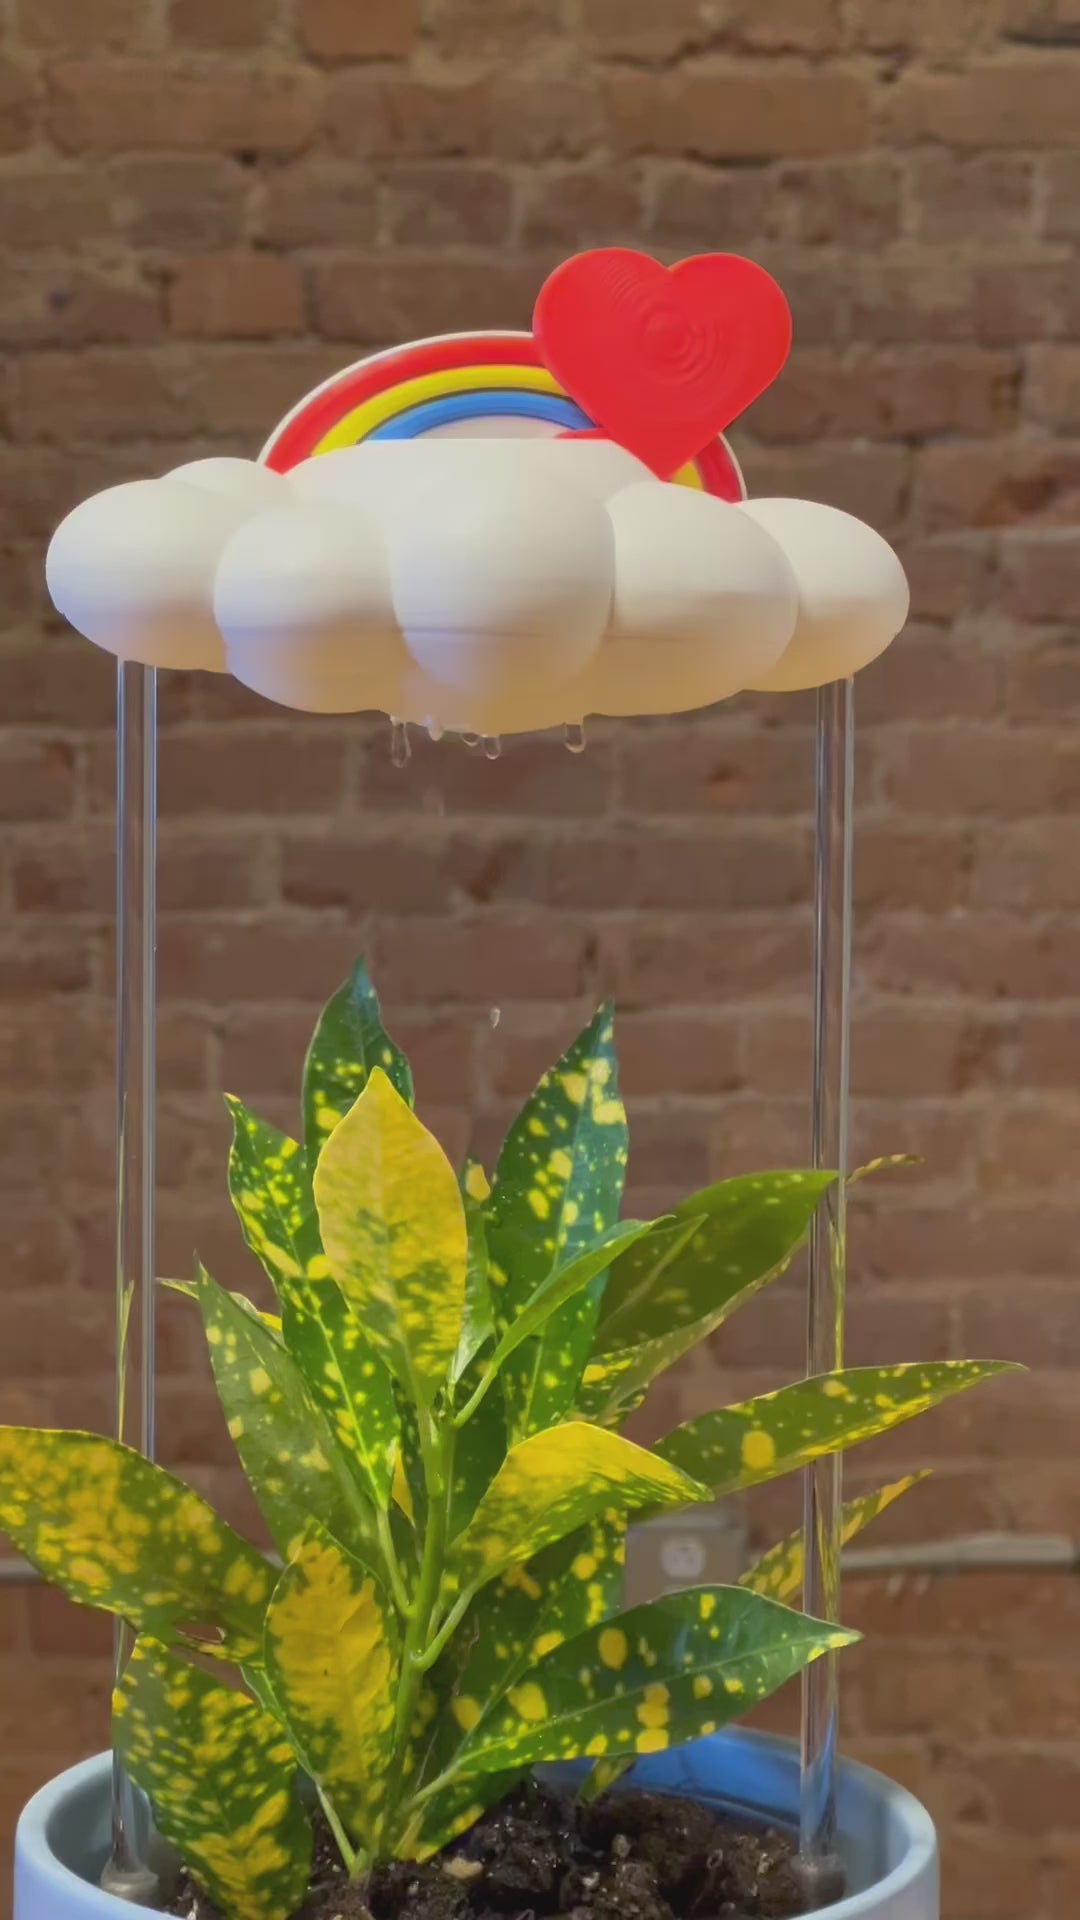 Red Heart and rainbow add-ons for THE CLOUD MAKERS dripping rain cloud